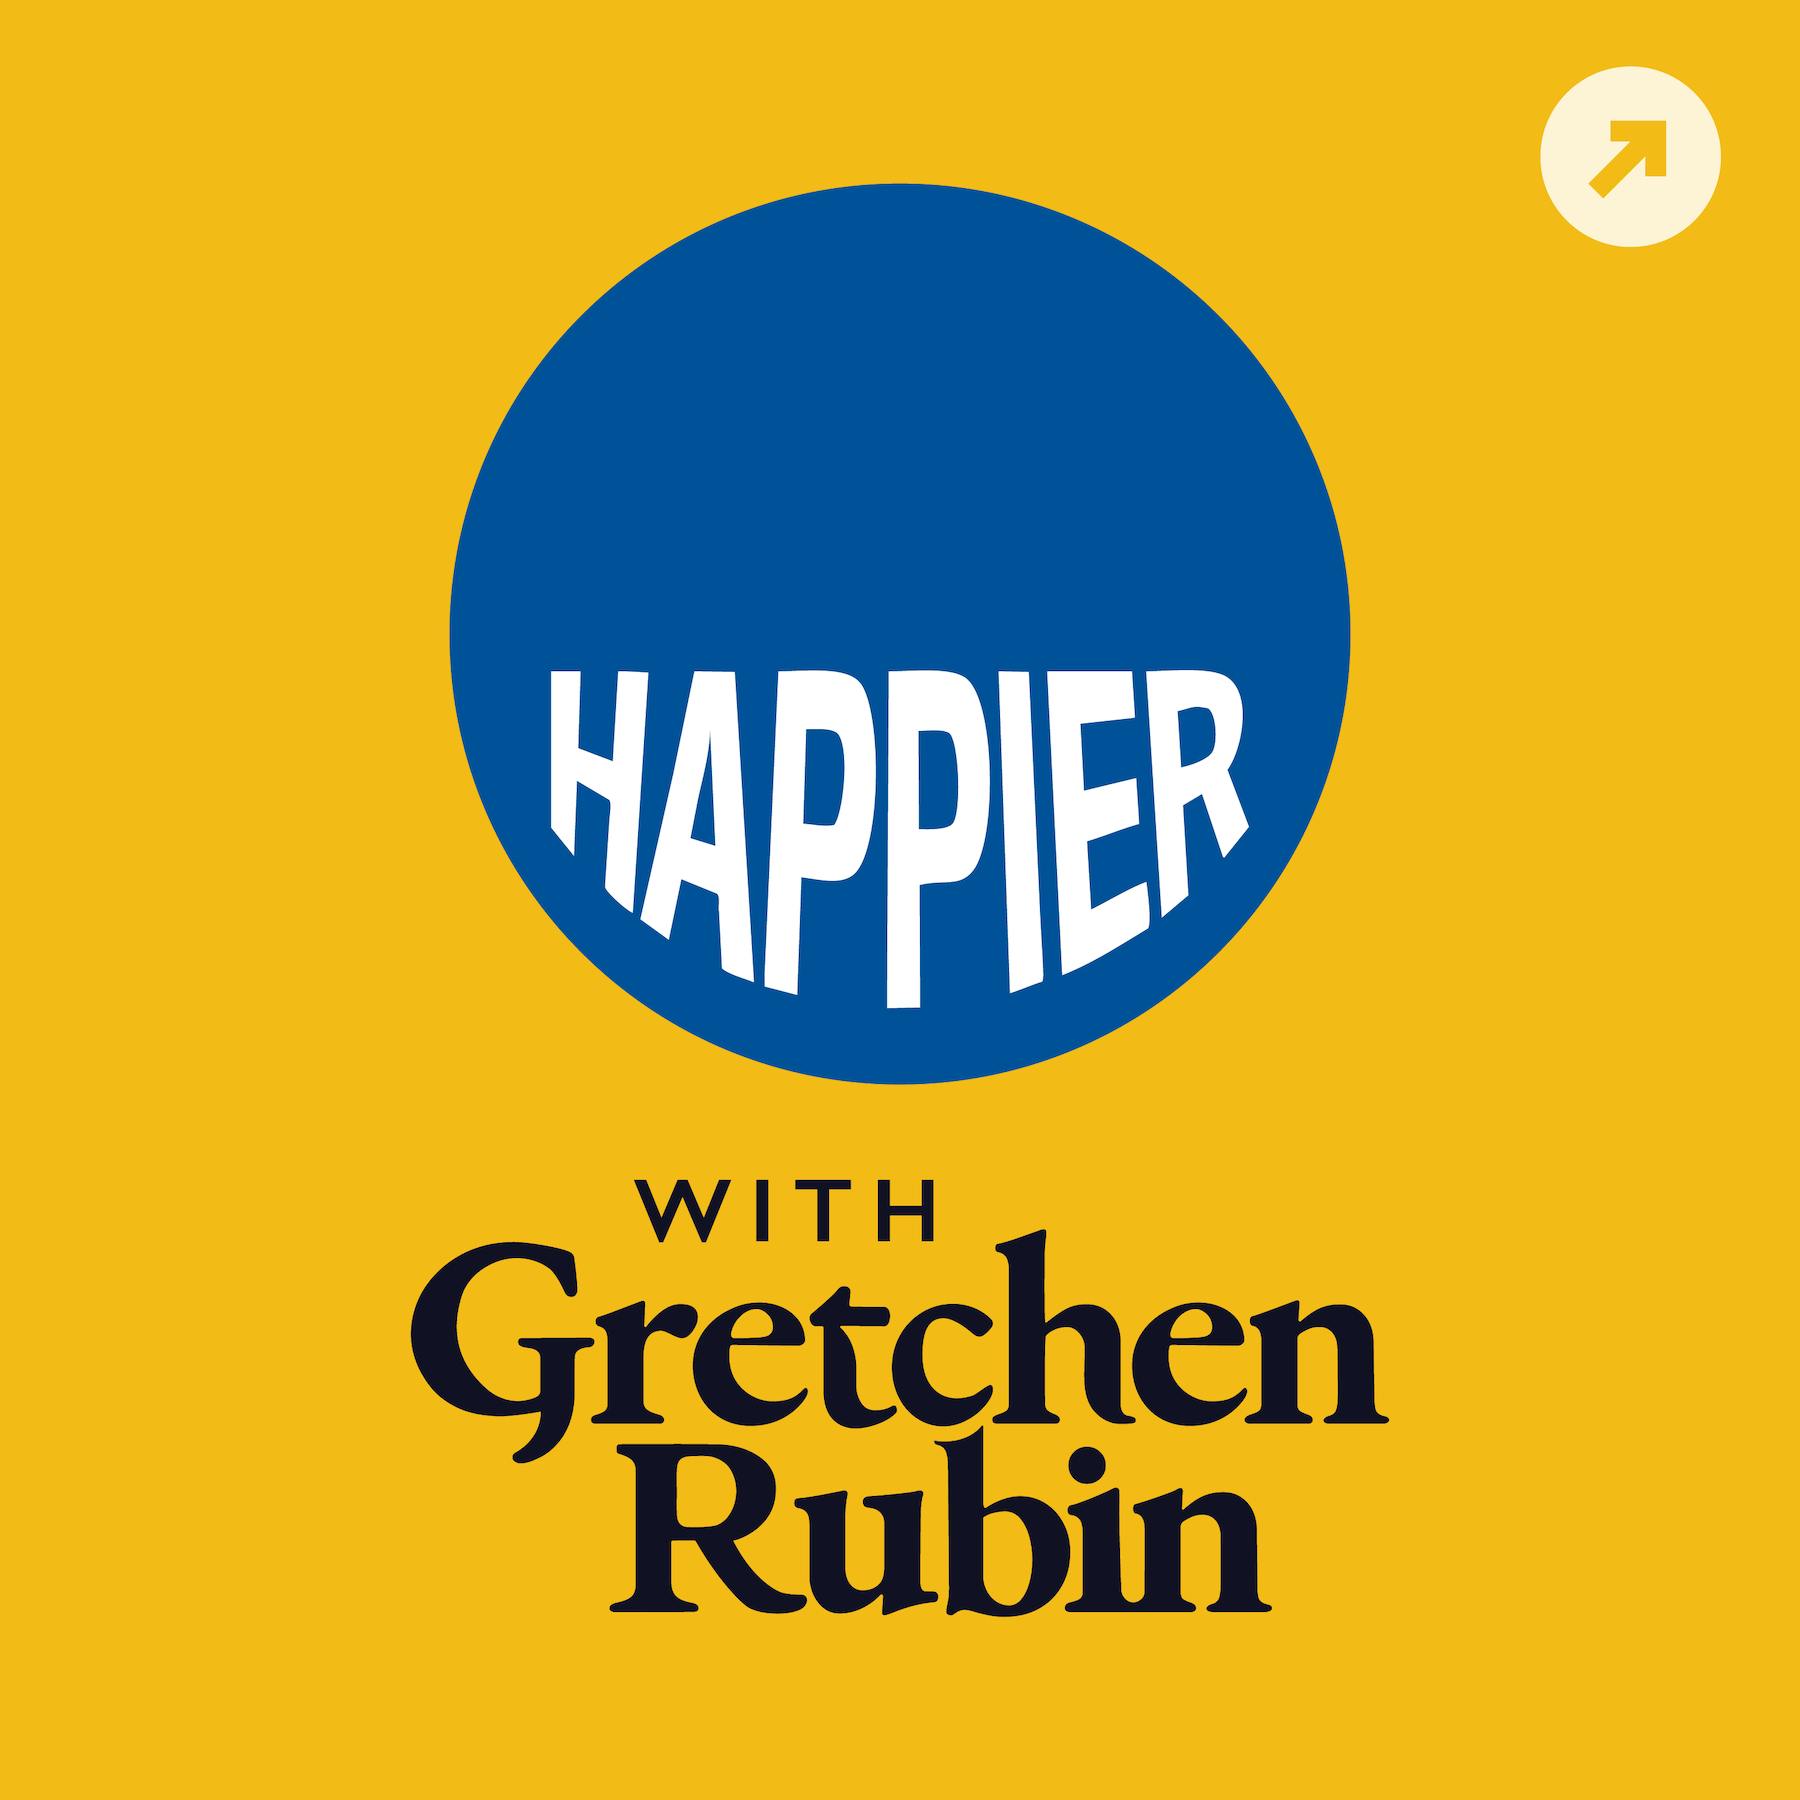 Ep. 241: Malcolm Gladwell Talks About “Talking to Strangers” Plus a Delicious, Healthy Hack